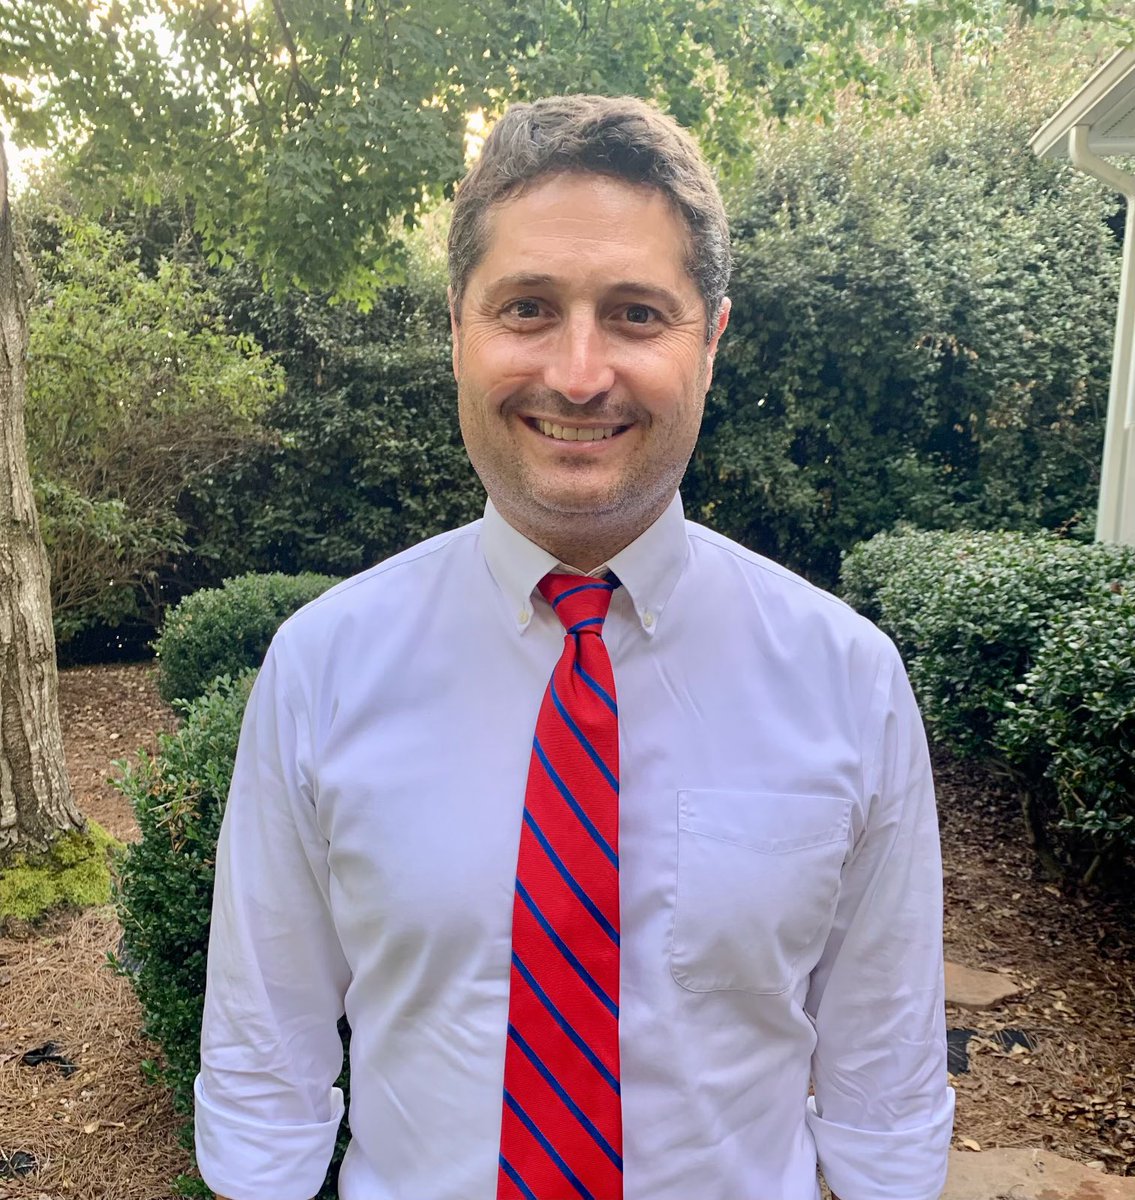 Congratulations to Mr. Austin Allain who was named principal of Reedy Creek Elementary School at tonight’s Board Meeting. We are thrilled to have @EducatorAllain join the Western Area! 🎉